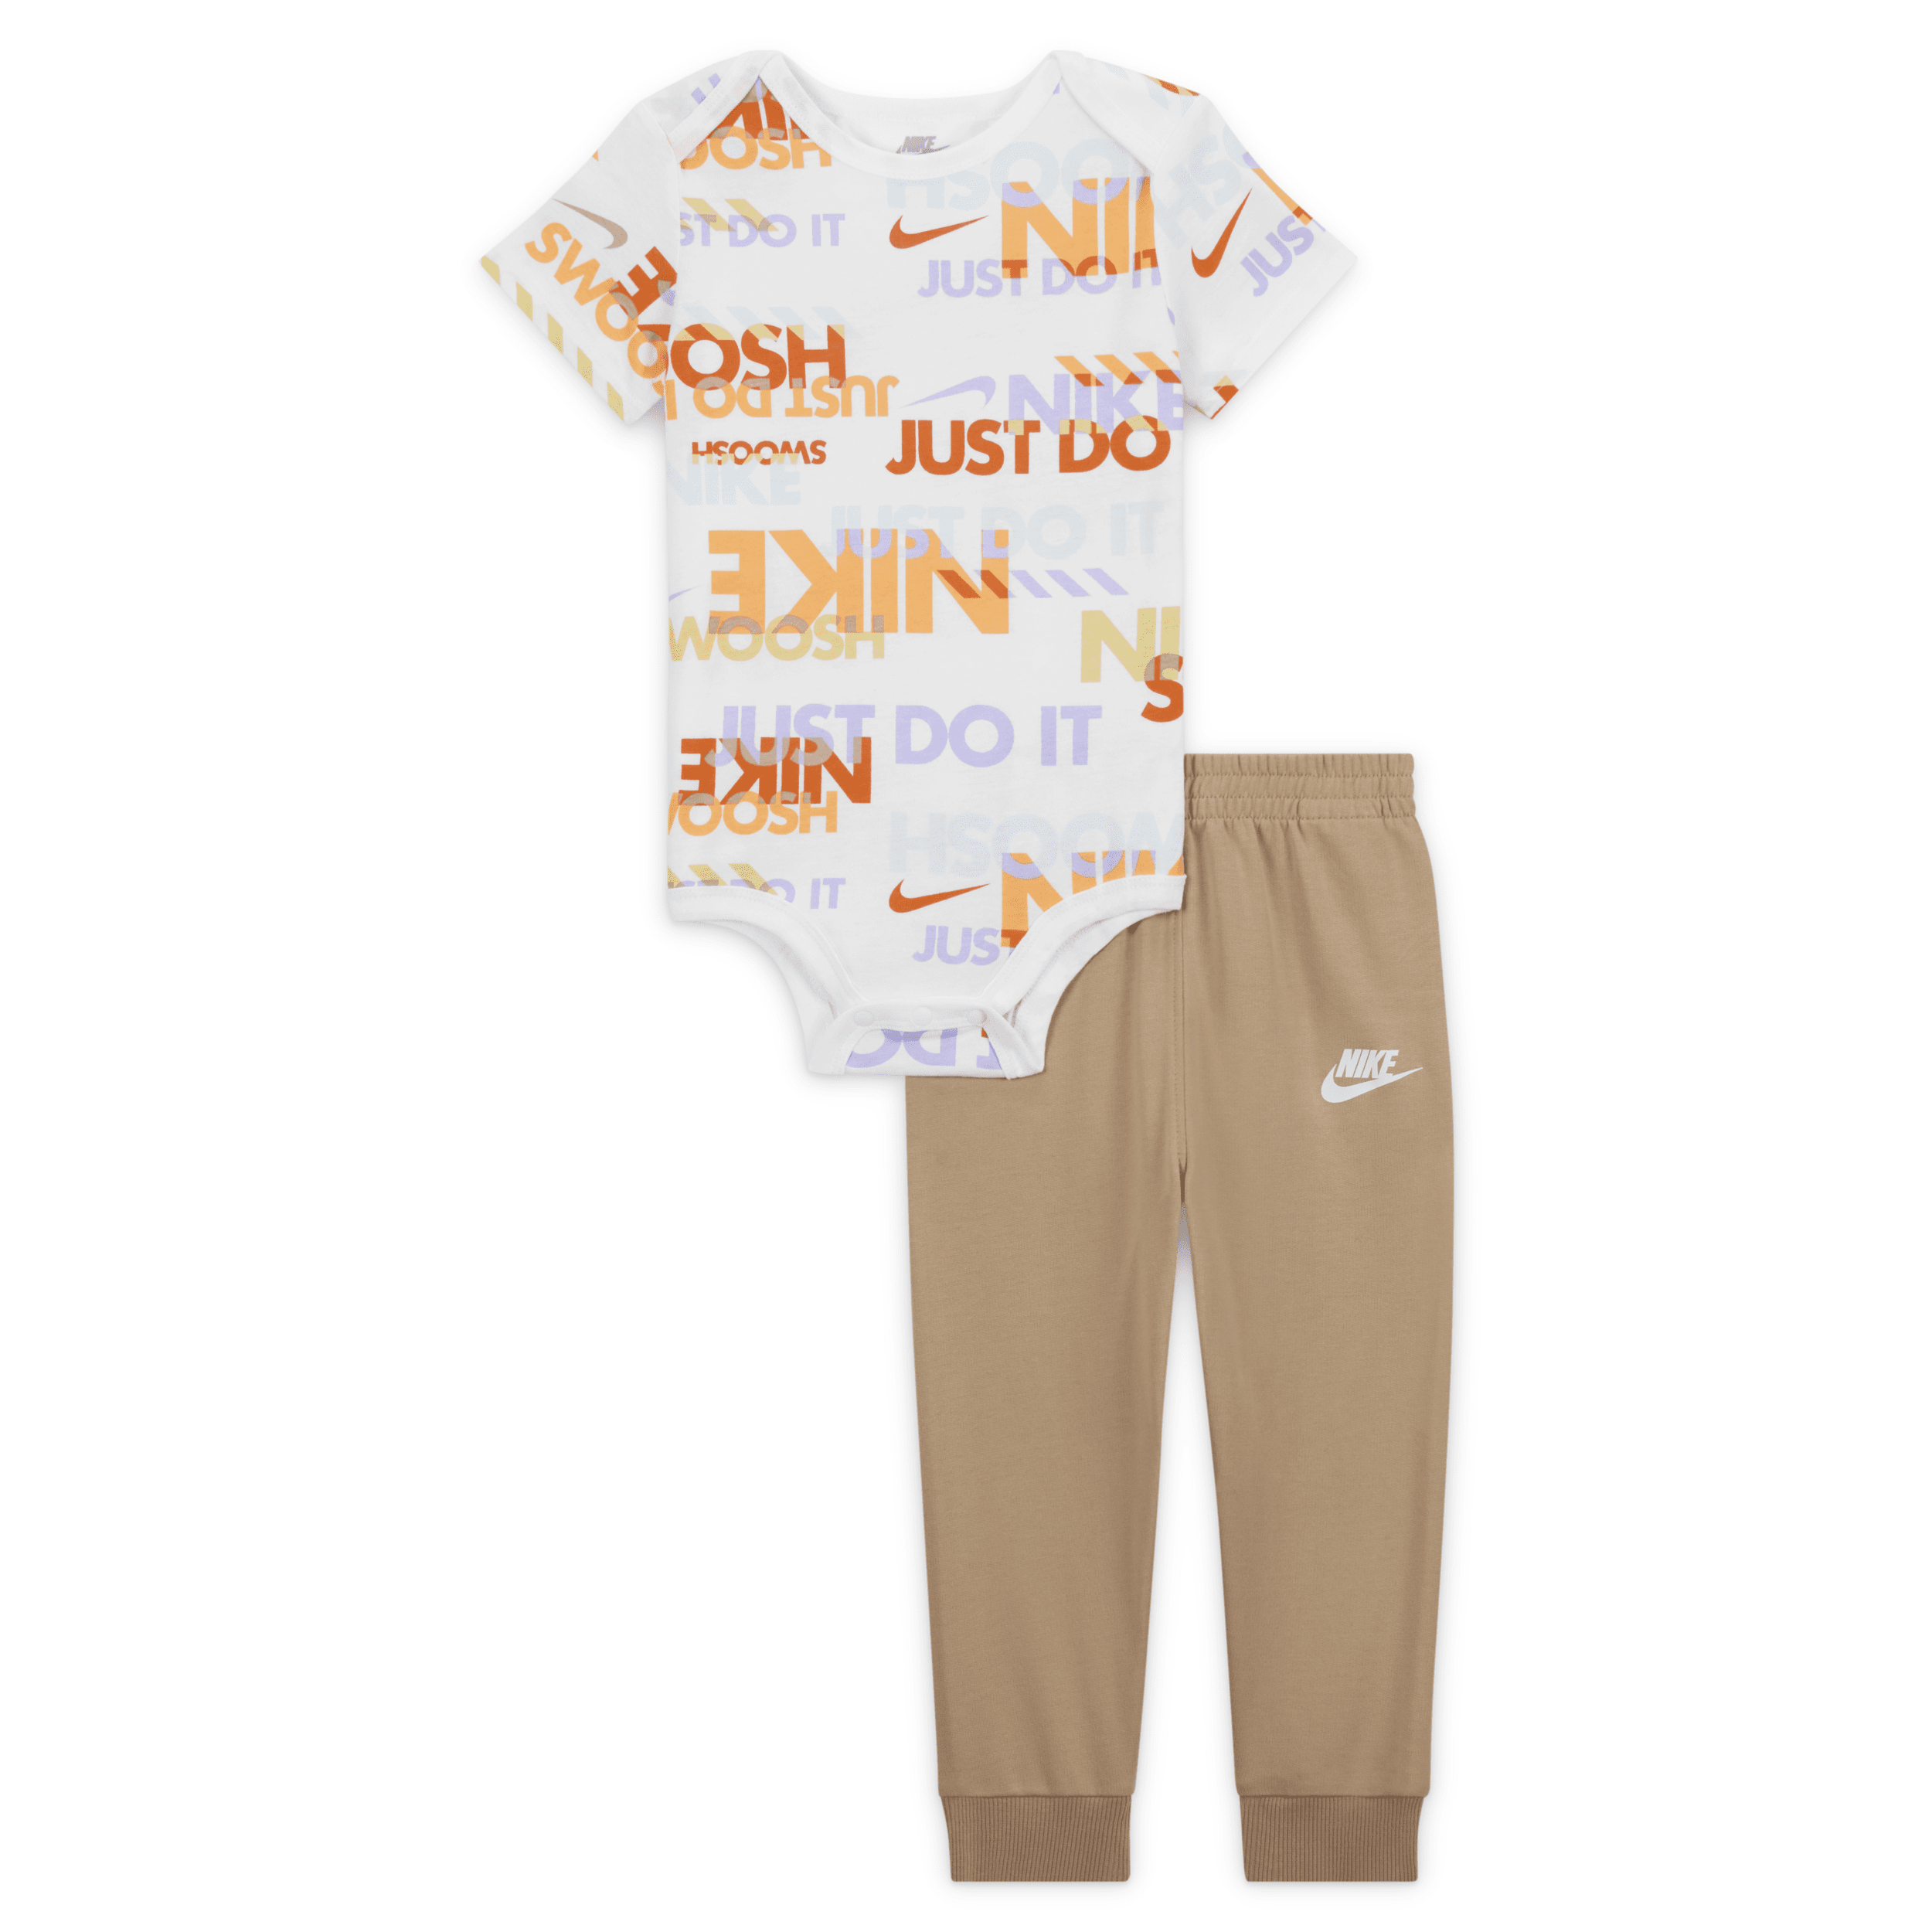 Nike Sportswear Playful Exploration Baby (12-24m) Printed Bodysuit And Pants Set In Brown